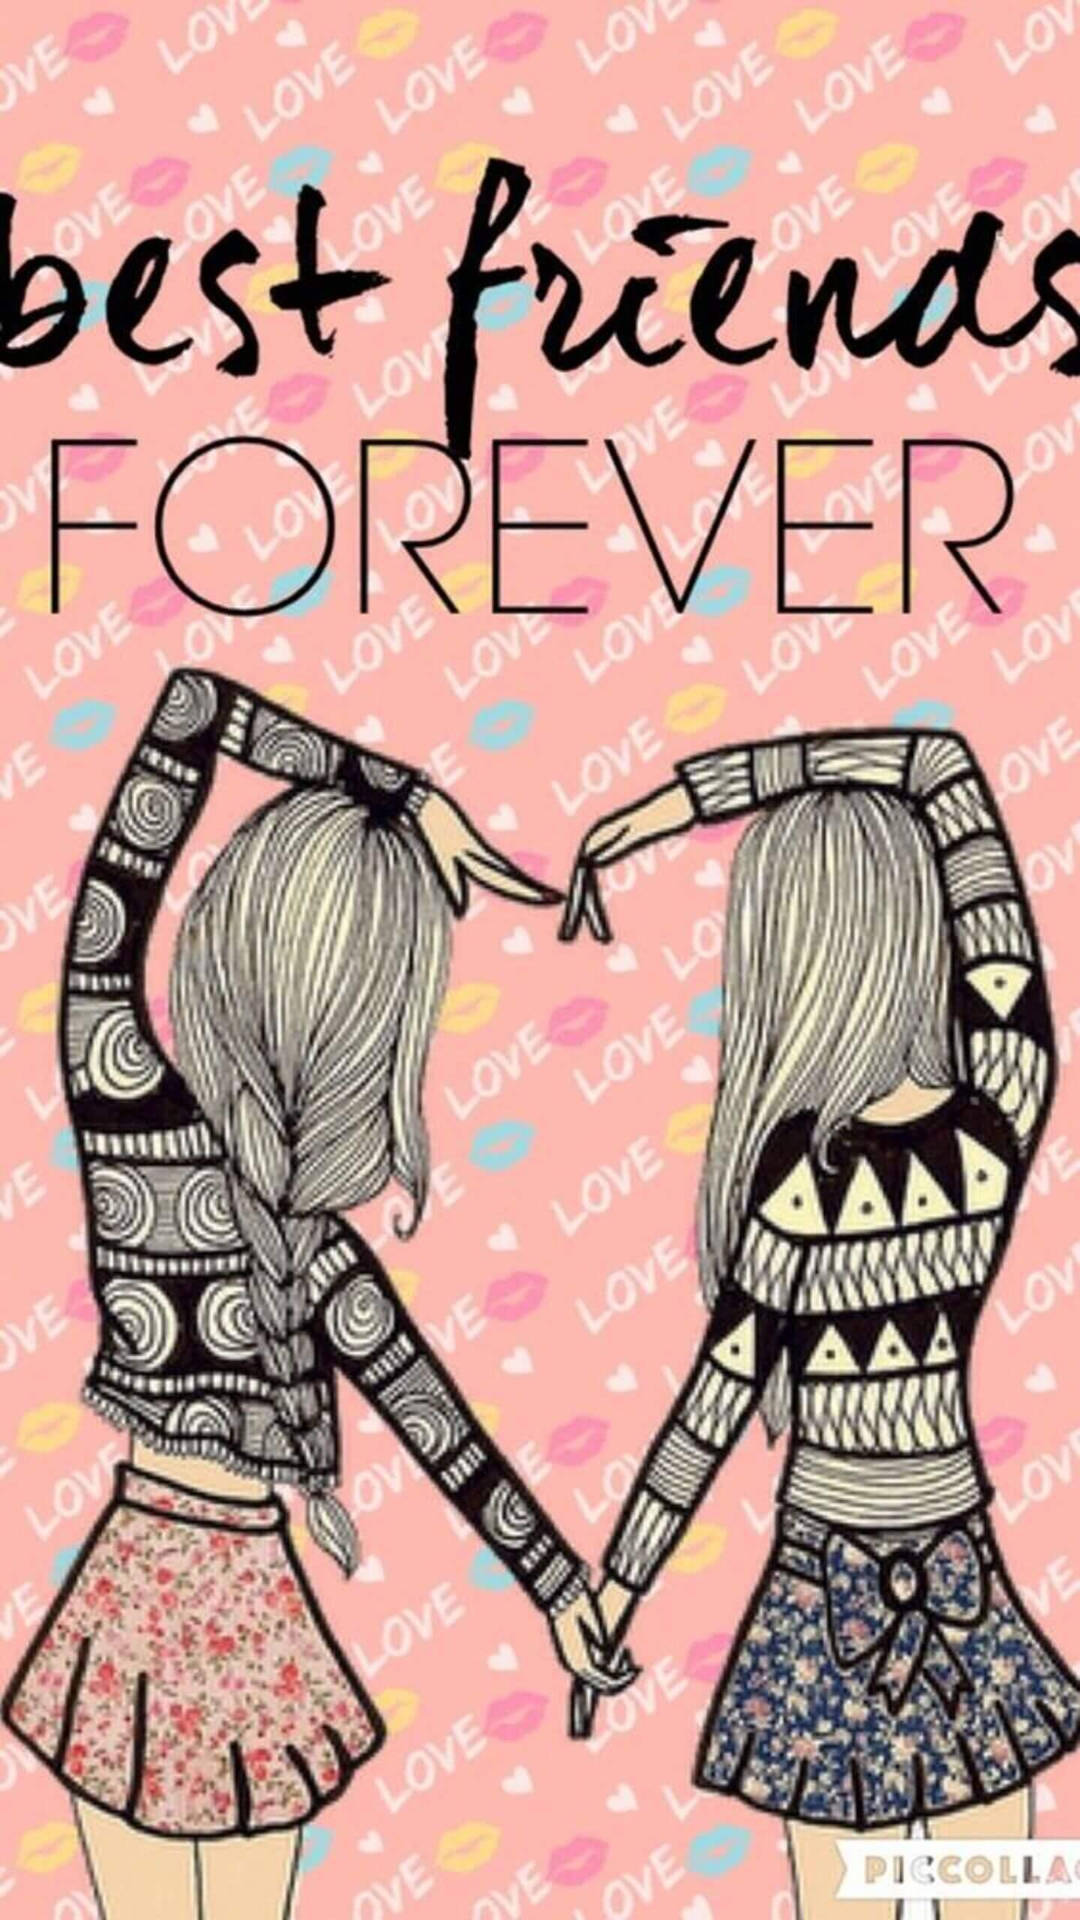 Download Matching Bff Forever Heart Wallpaper